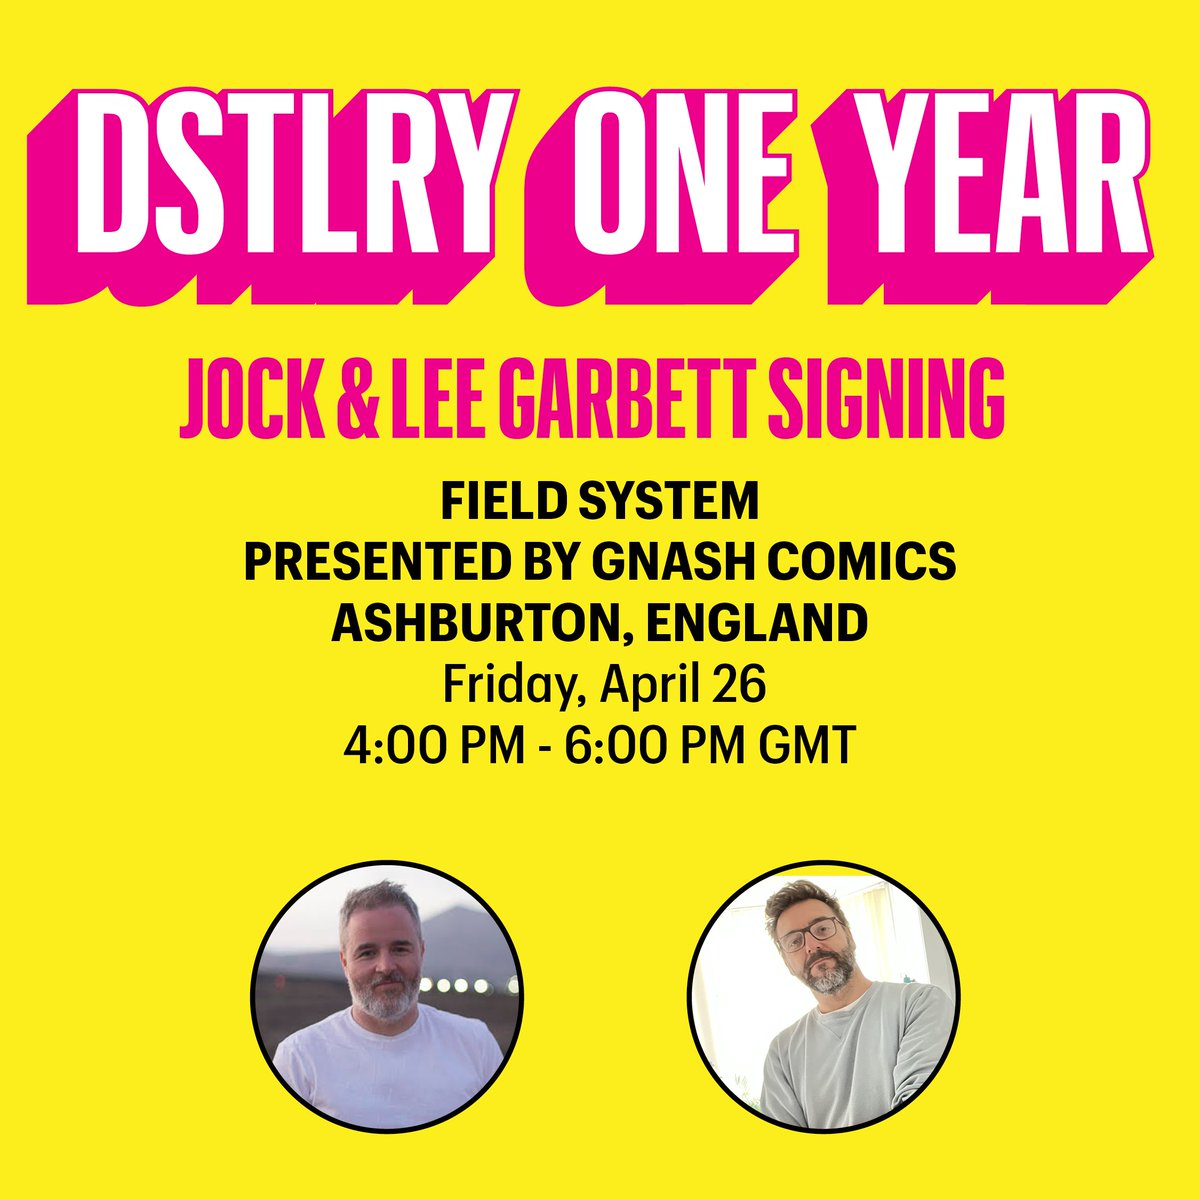 The party continues to celebrate a year of DSTLRY! TODAY Founding Creators @Jock4twenty & @LeeGarbett signing at @gnashcomics #DSTLRY